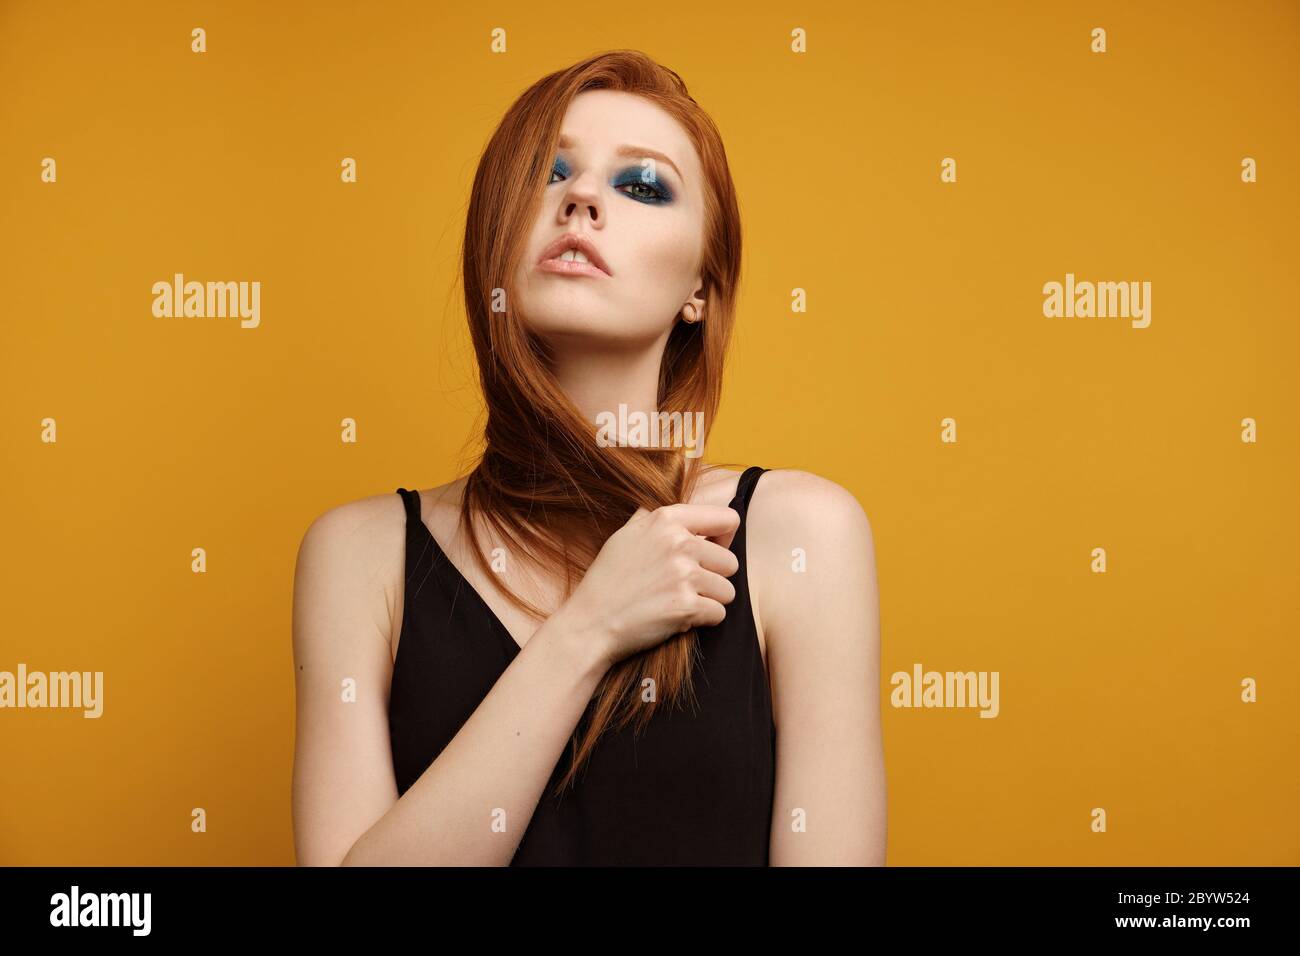 Redhead girl in a black top and with blue eye makeup stands on a yellow background with head thrown back and covered with hairs Stock Photo